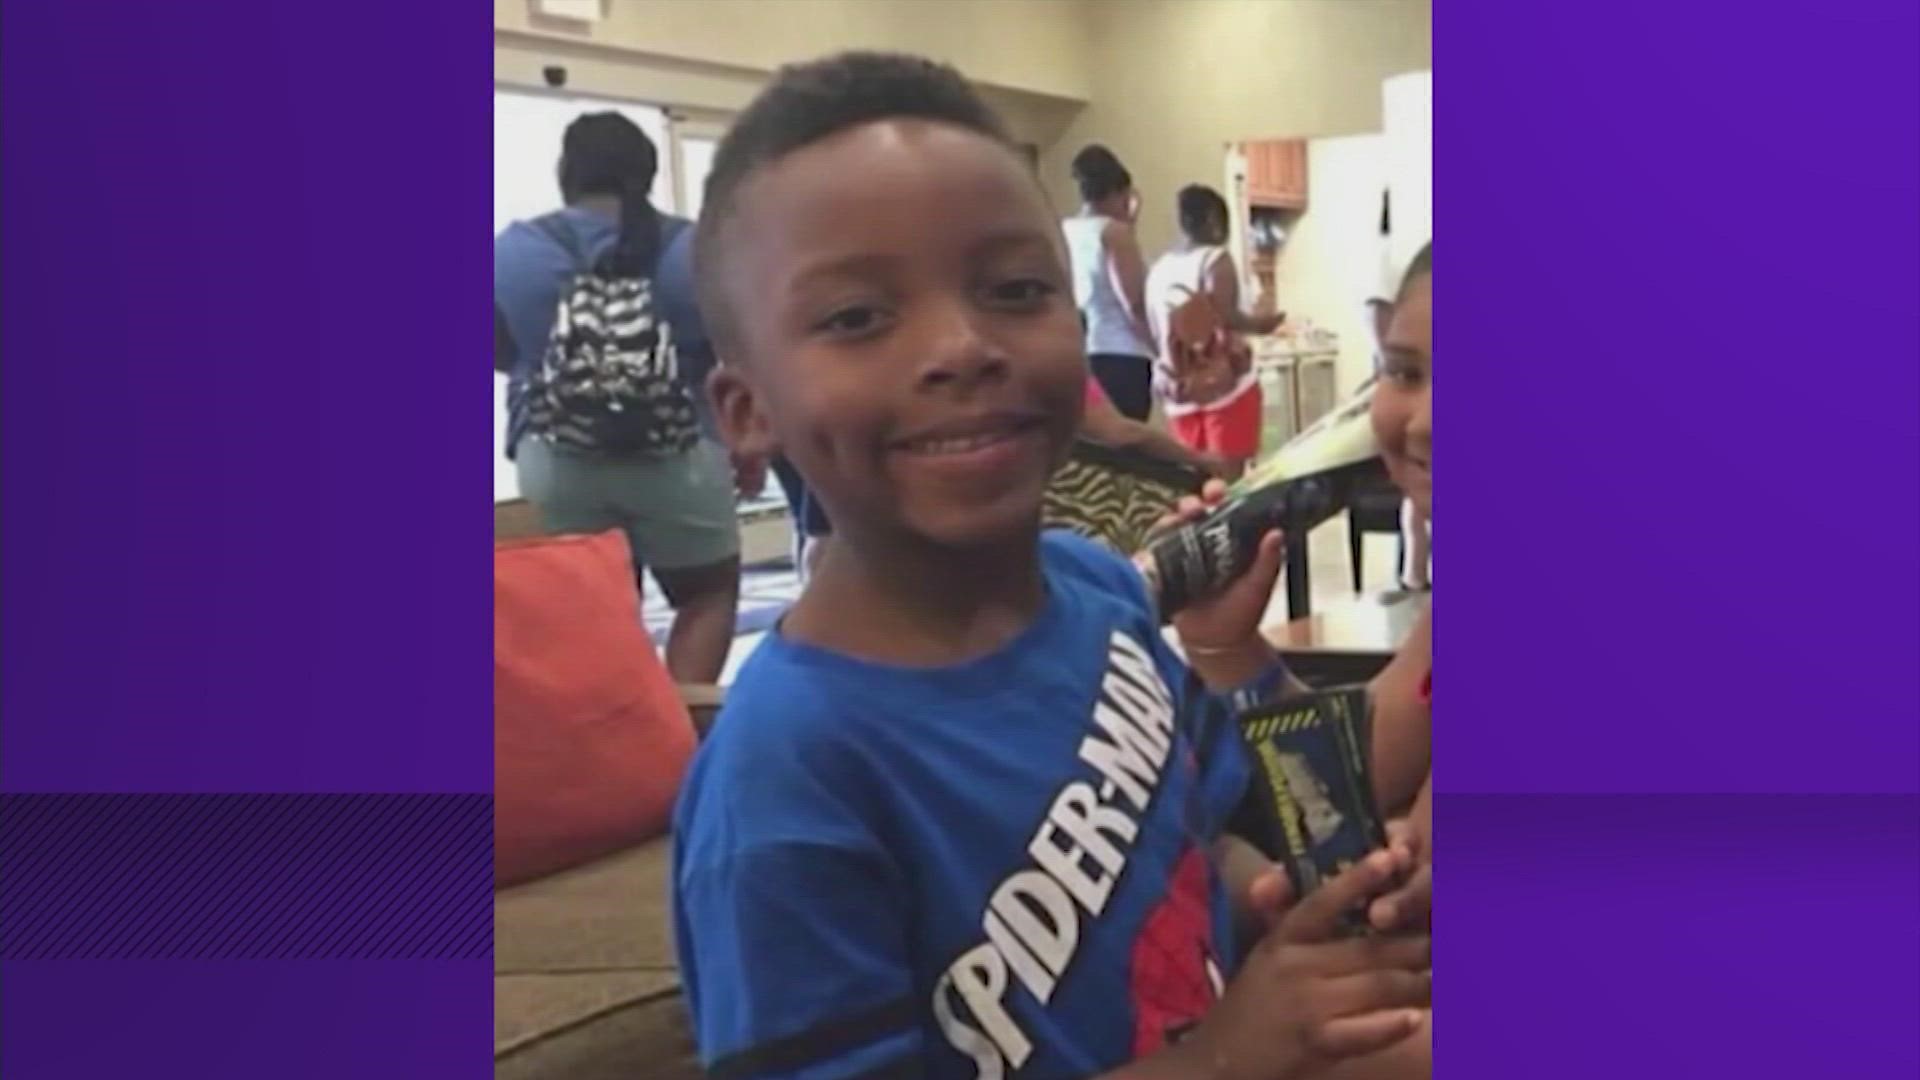 Nine-year-old Blount is the youngest of 10 people that died during and after the Astroworld Festival. His family is celebrating his life in Dallas.